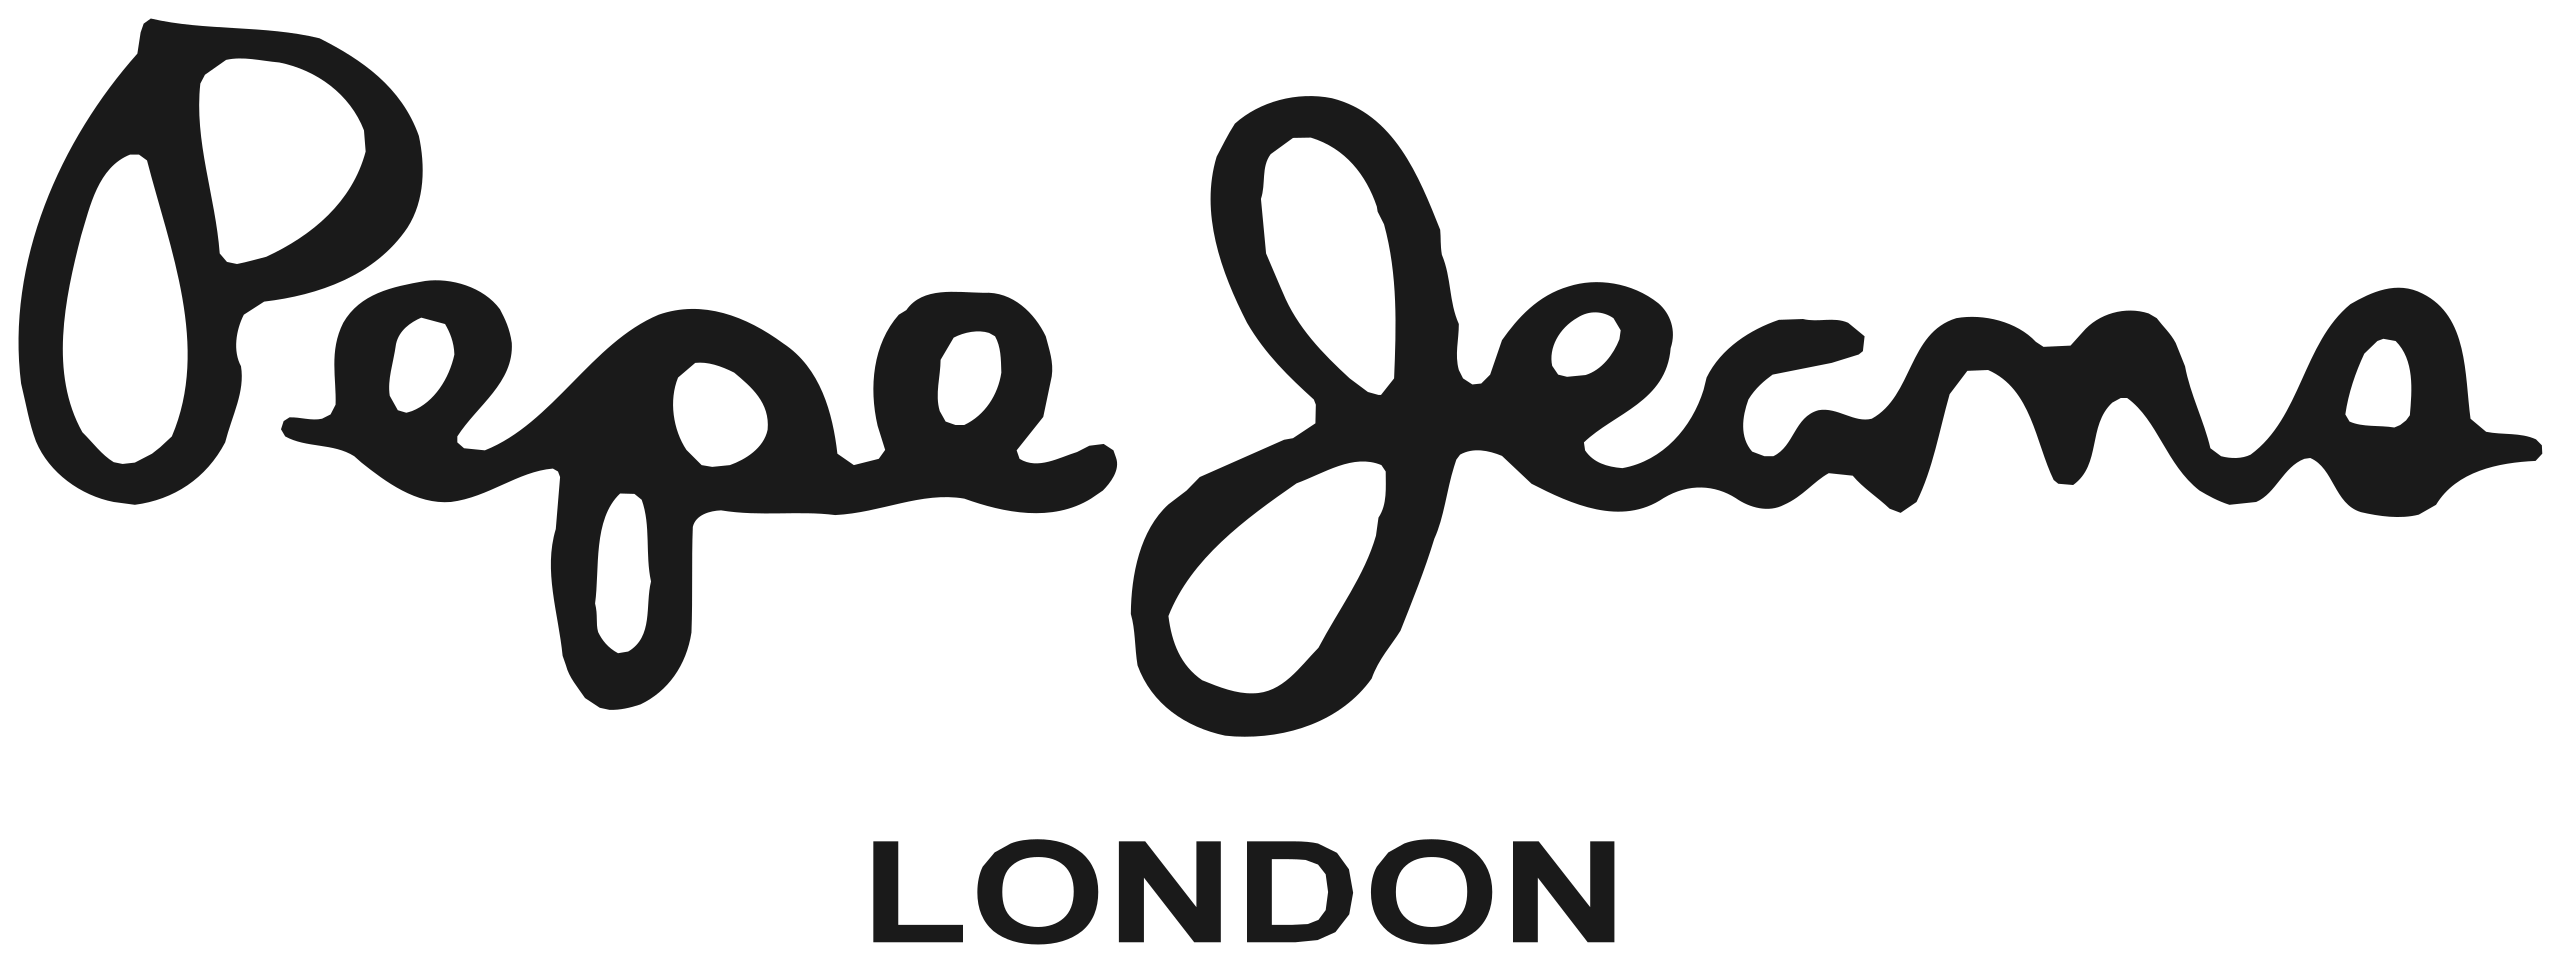 Pepe Jeans Coupons & Promo Codes